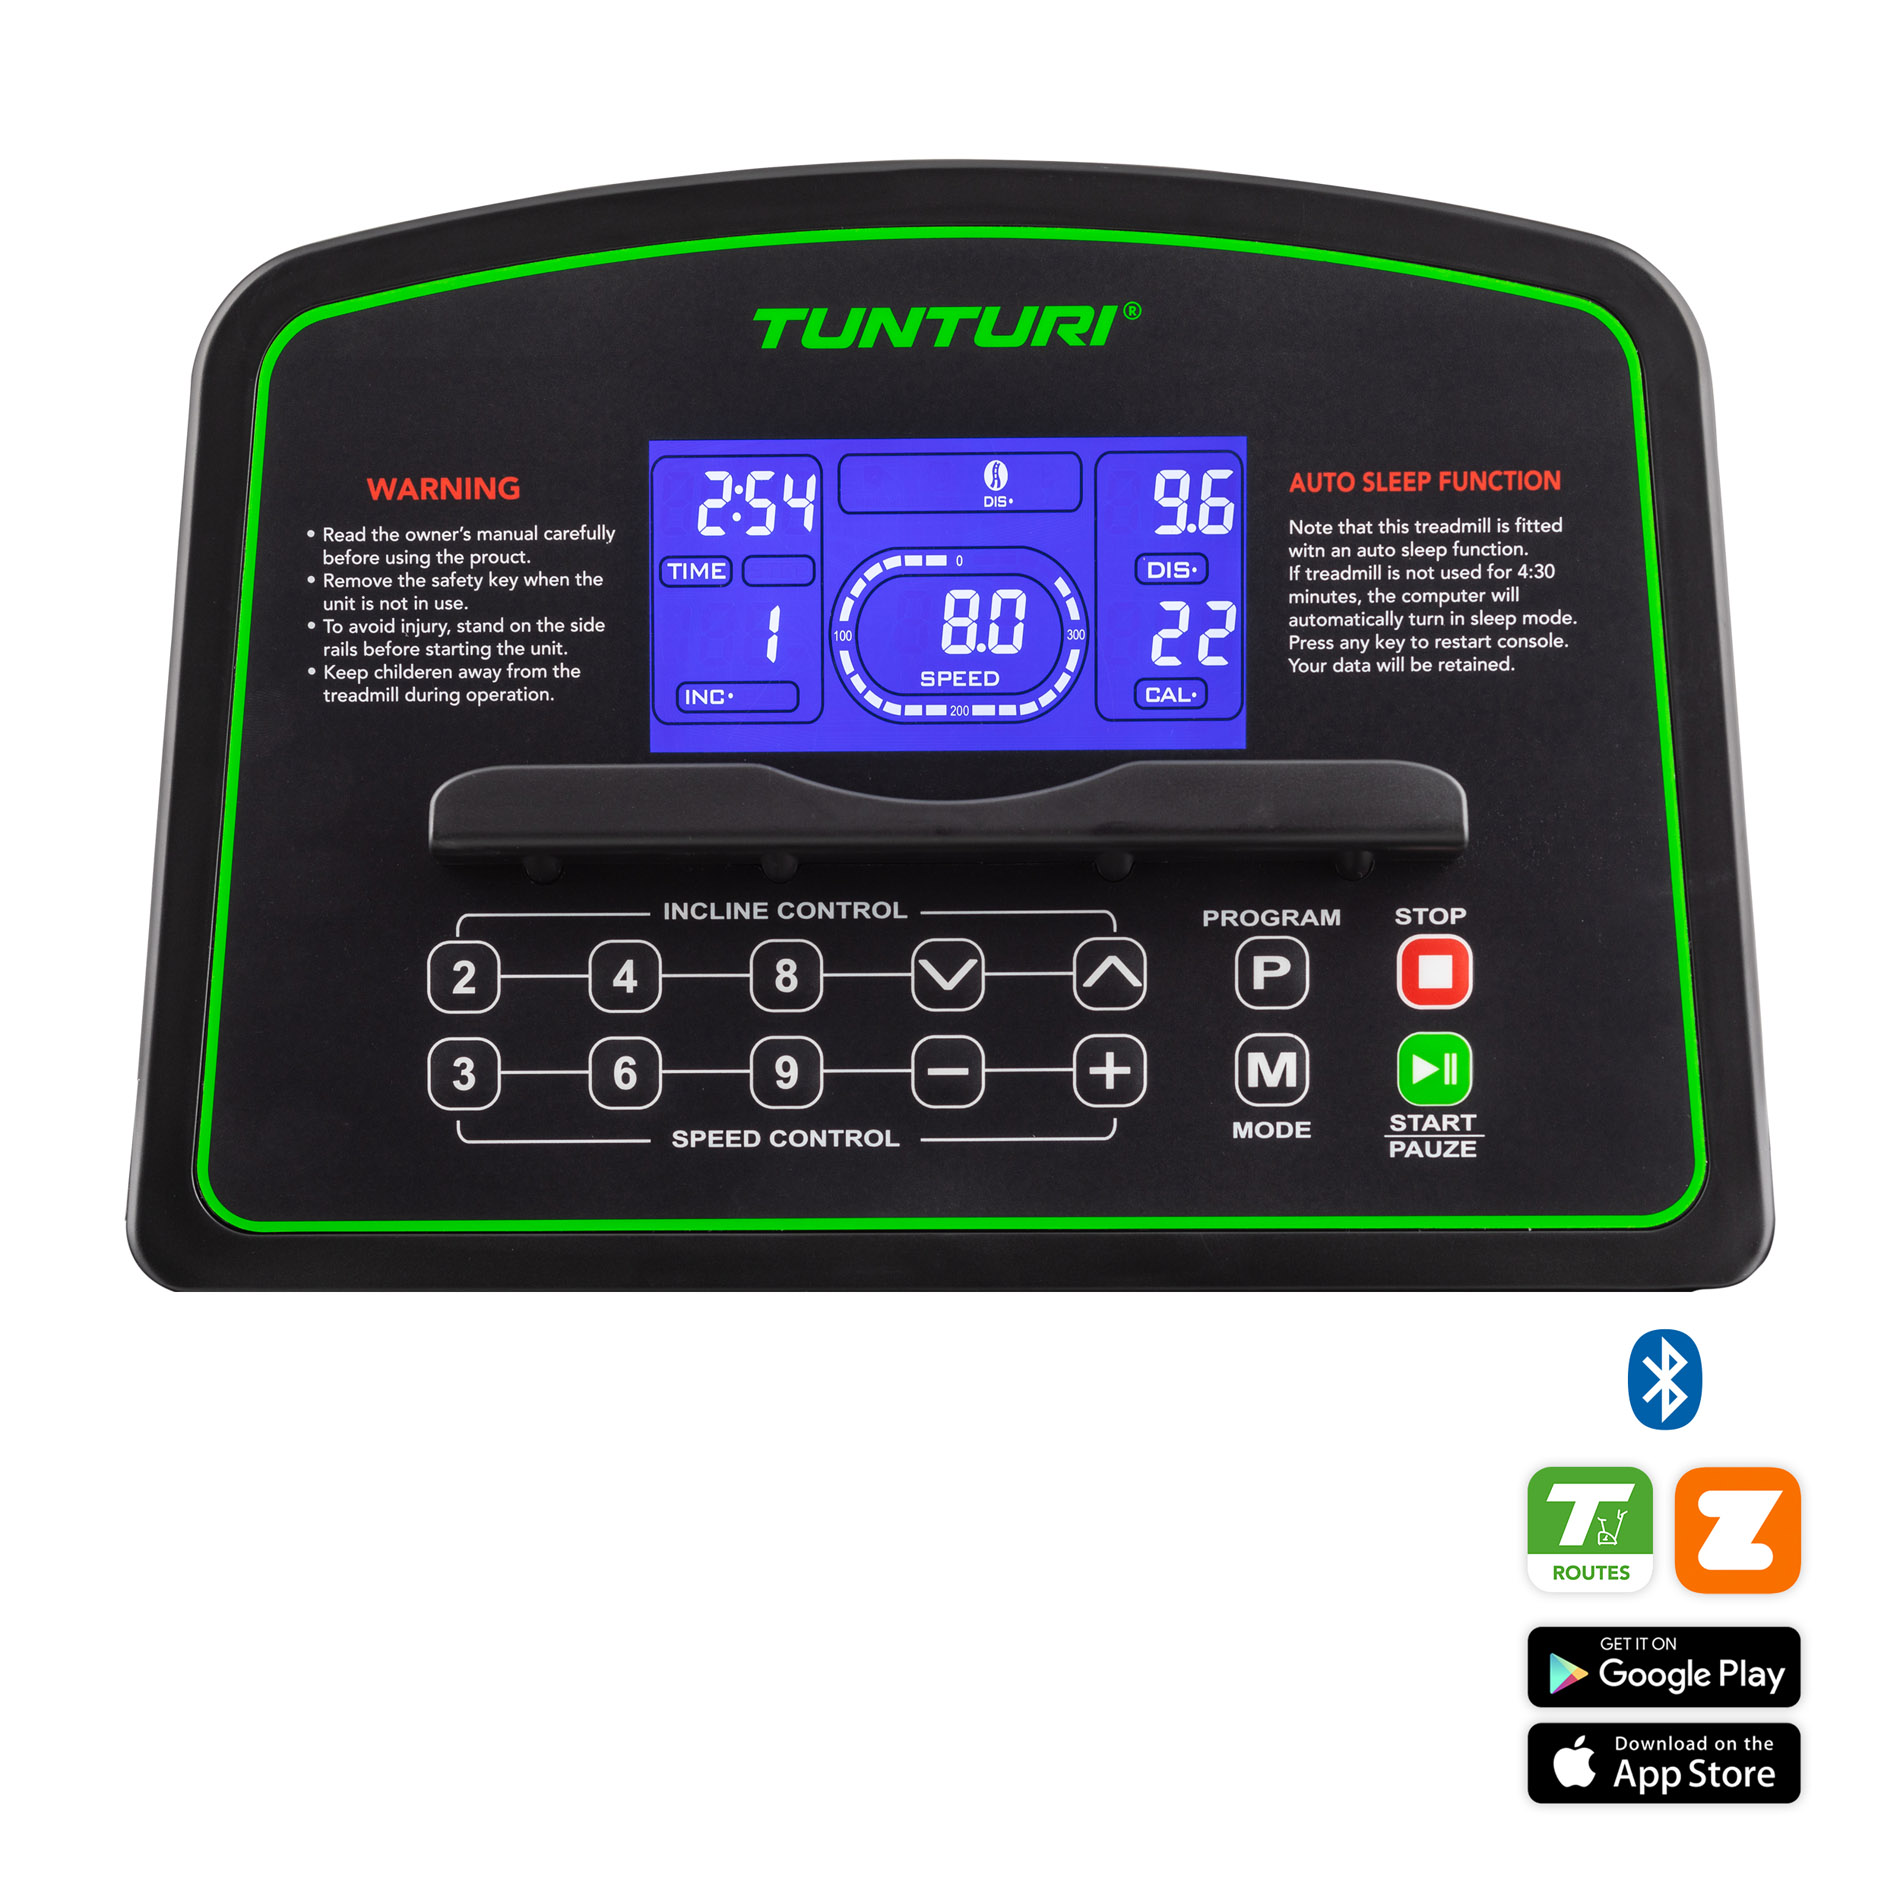 Cardio Fit T40 Loopband